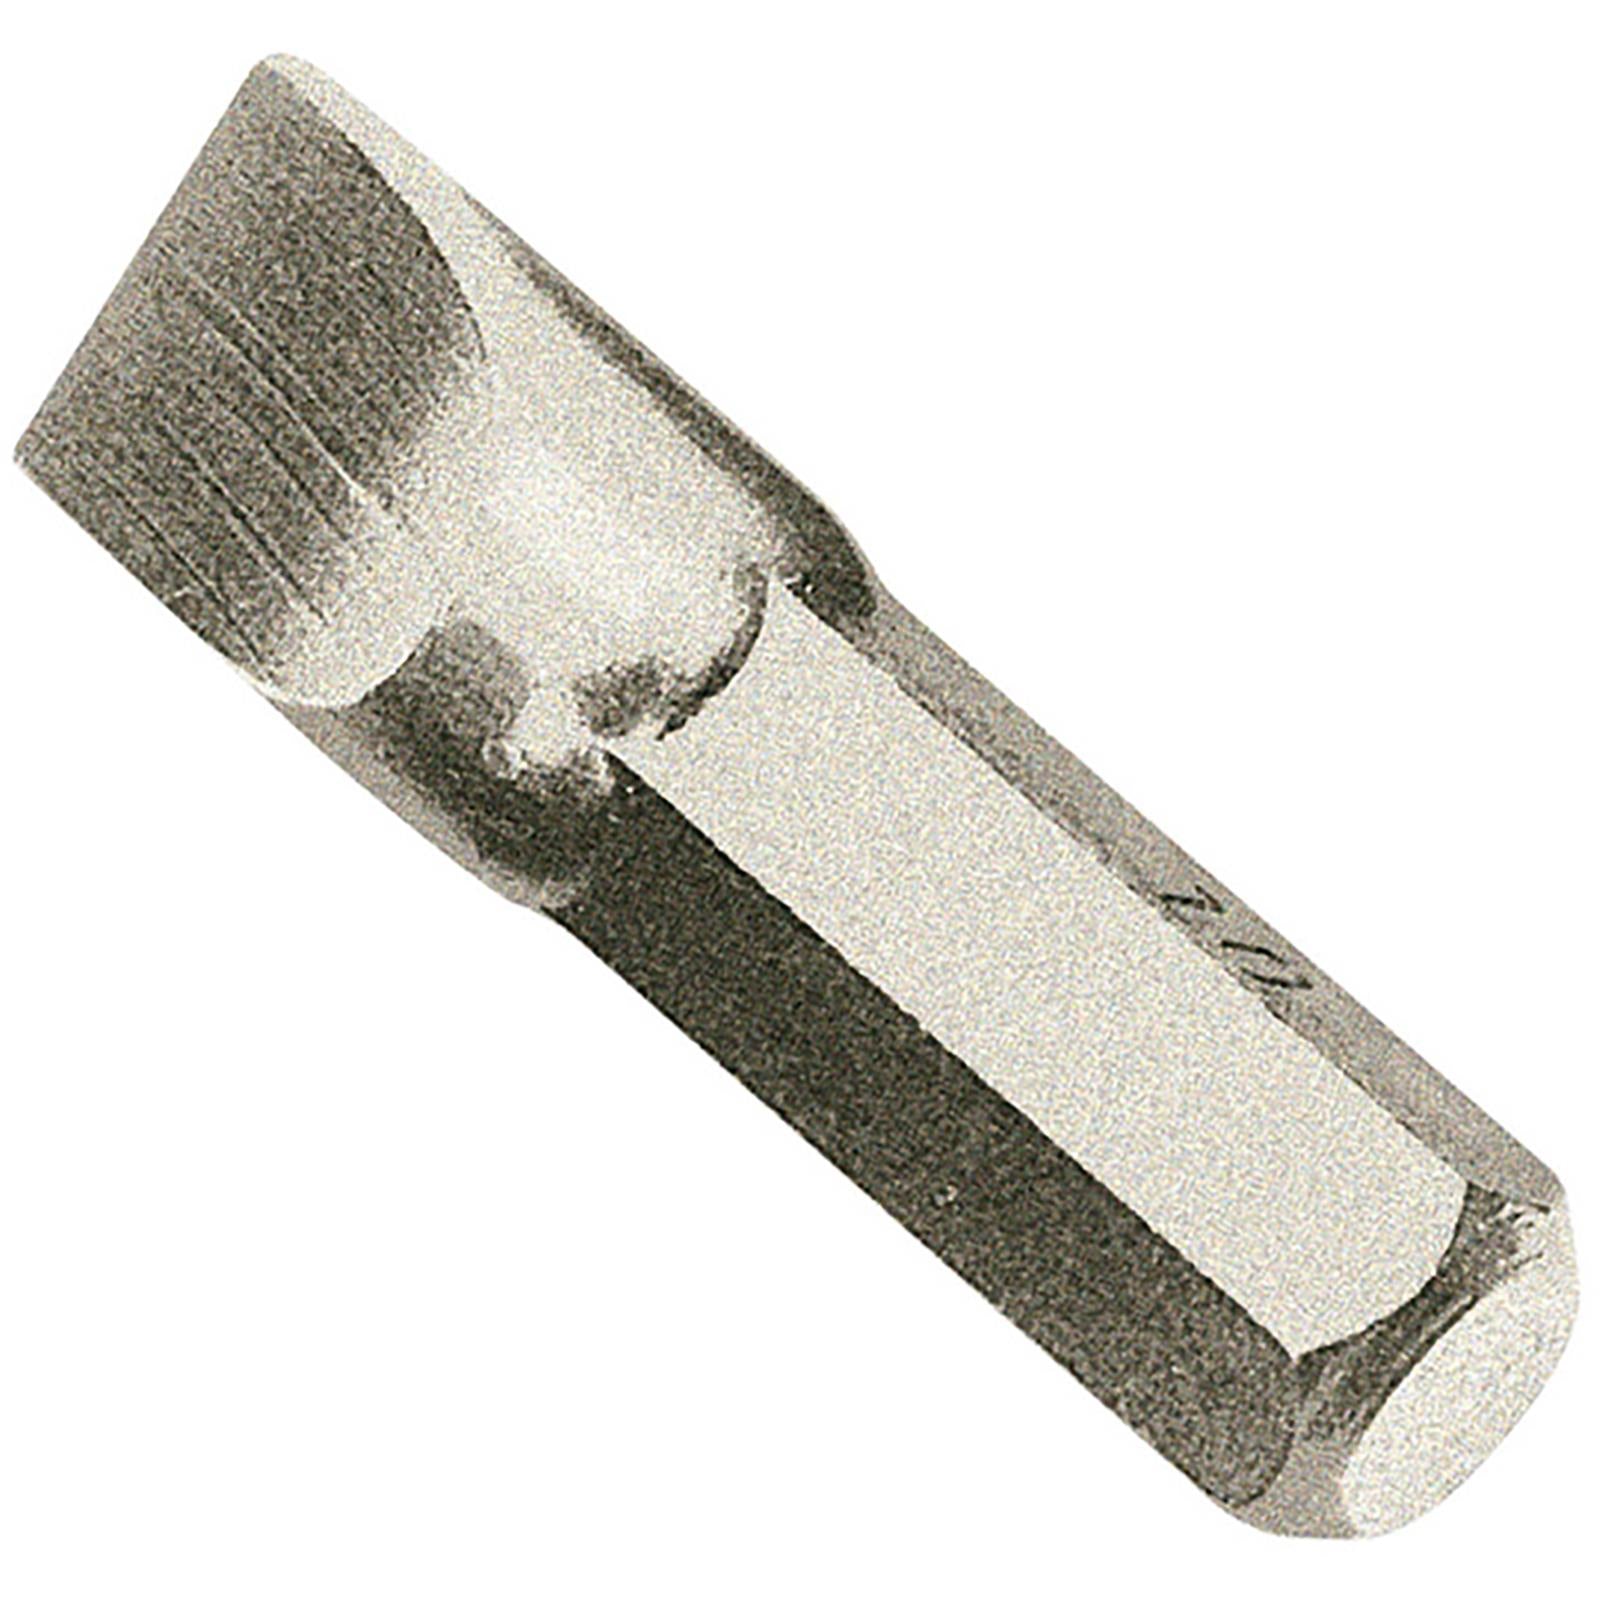 Draper Impact Screwdriver Bit Slotted 10mm with 8mm Shank